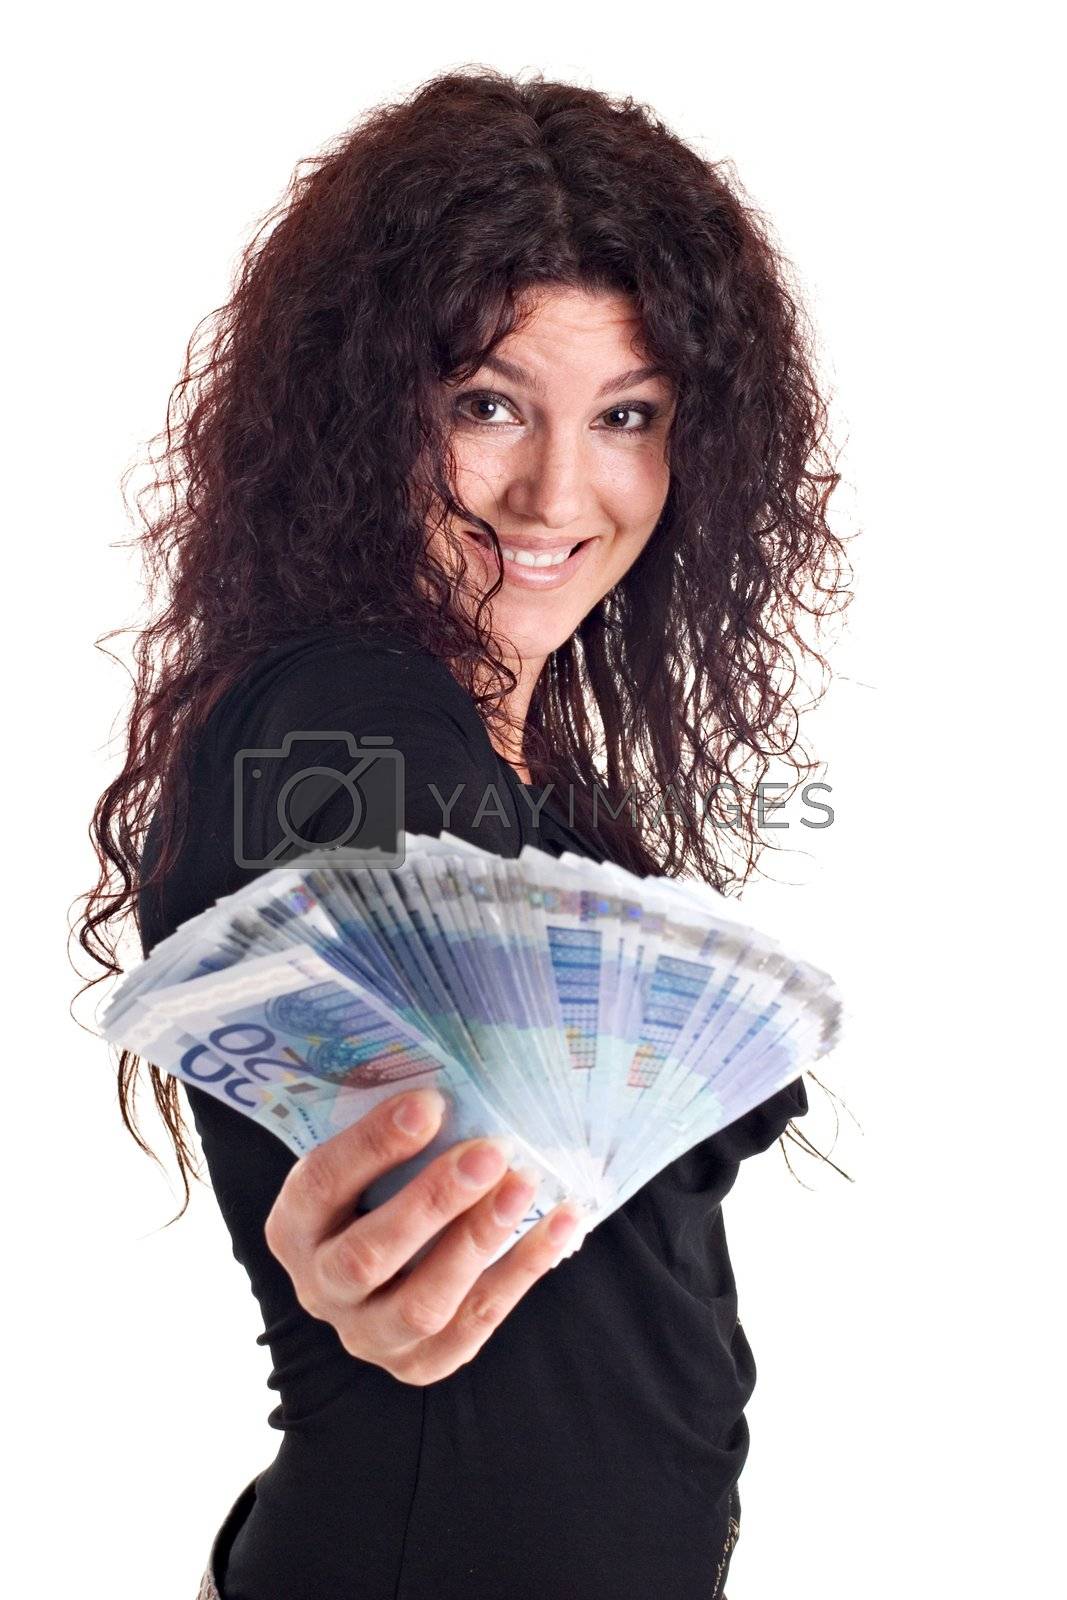 Royalty free image of Show me the money by ajn